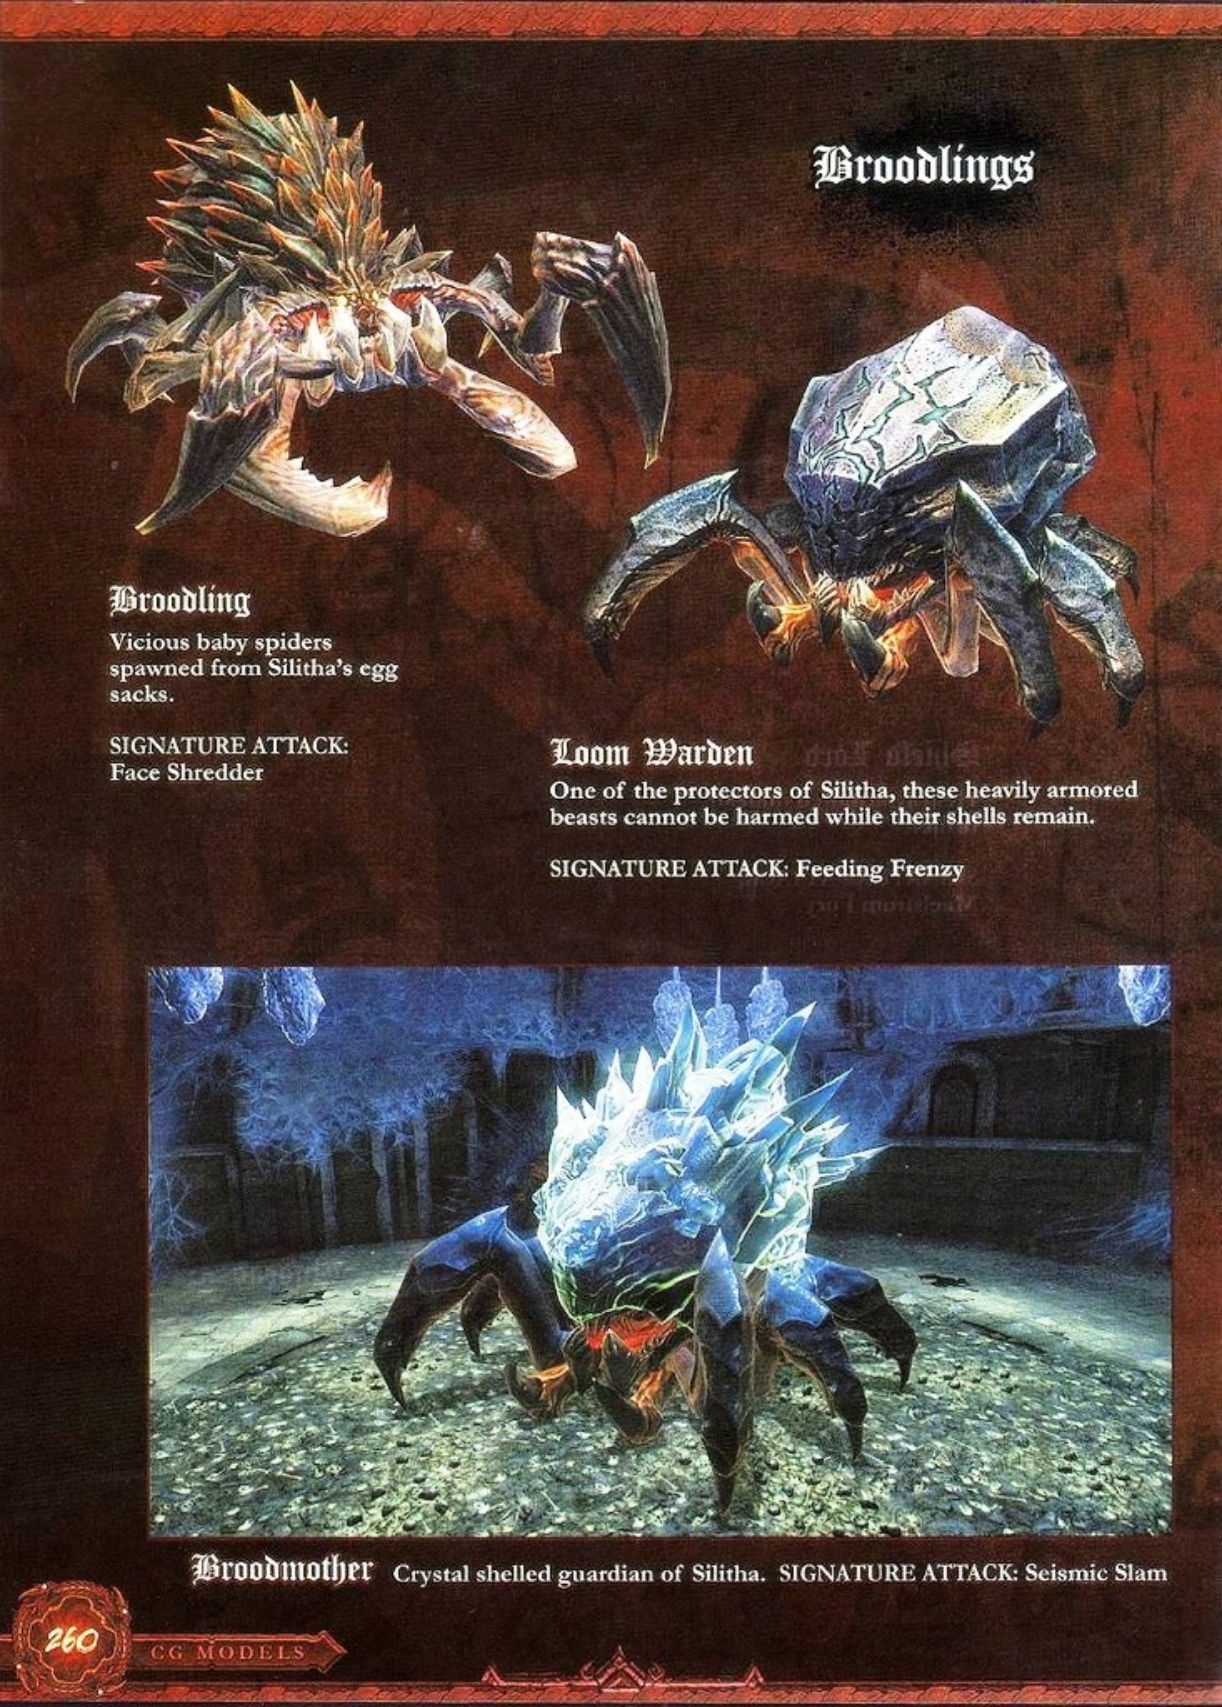 The Art of Darksiders (low-res, missing pages, and watermarked) 256